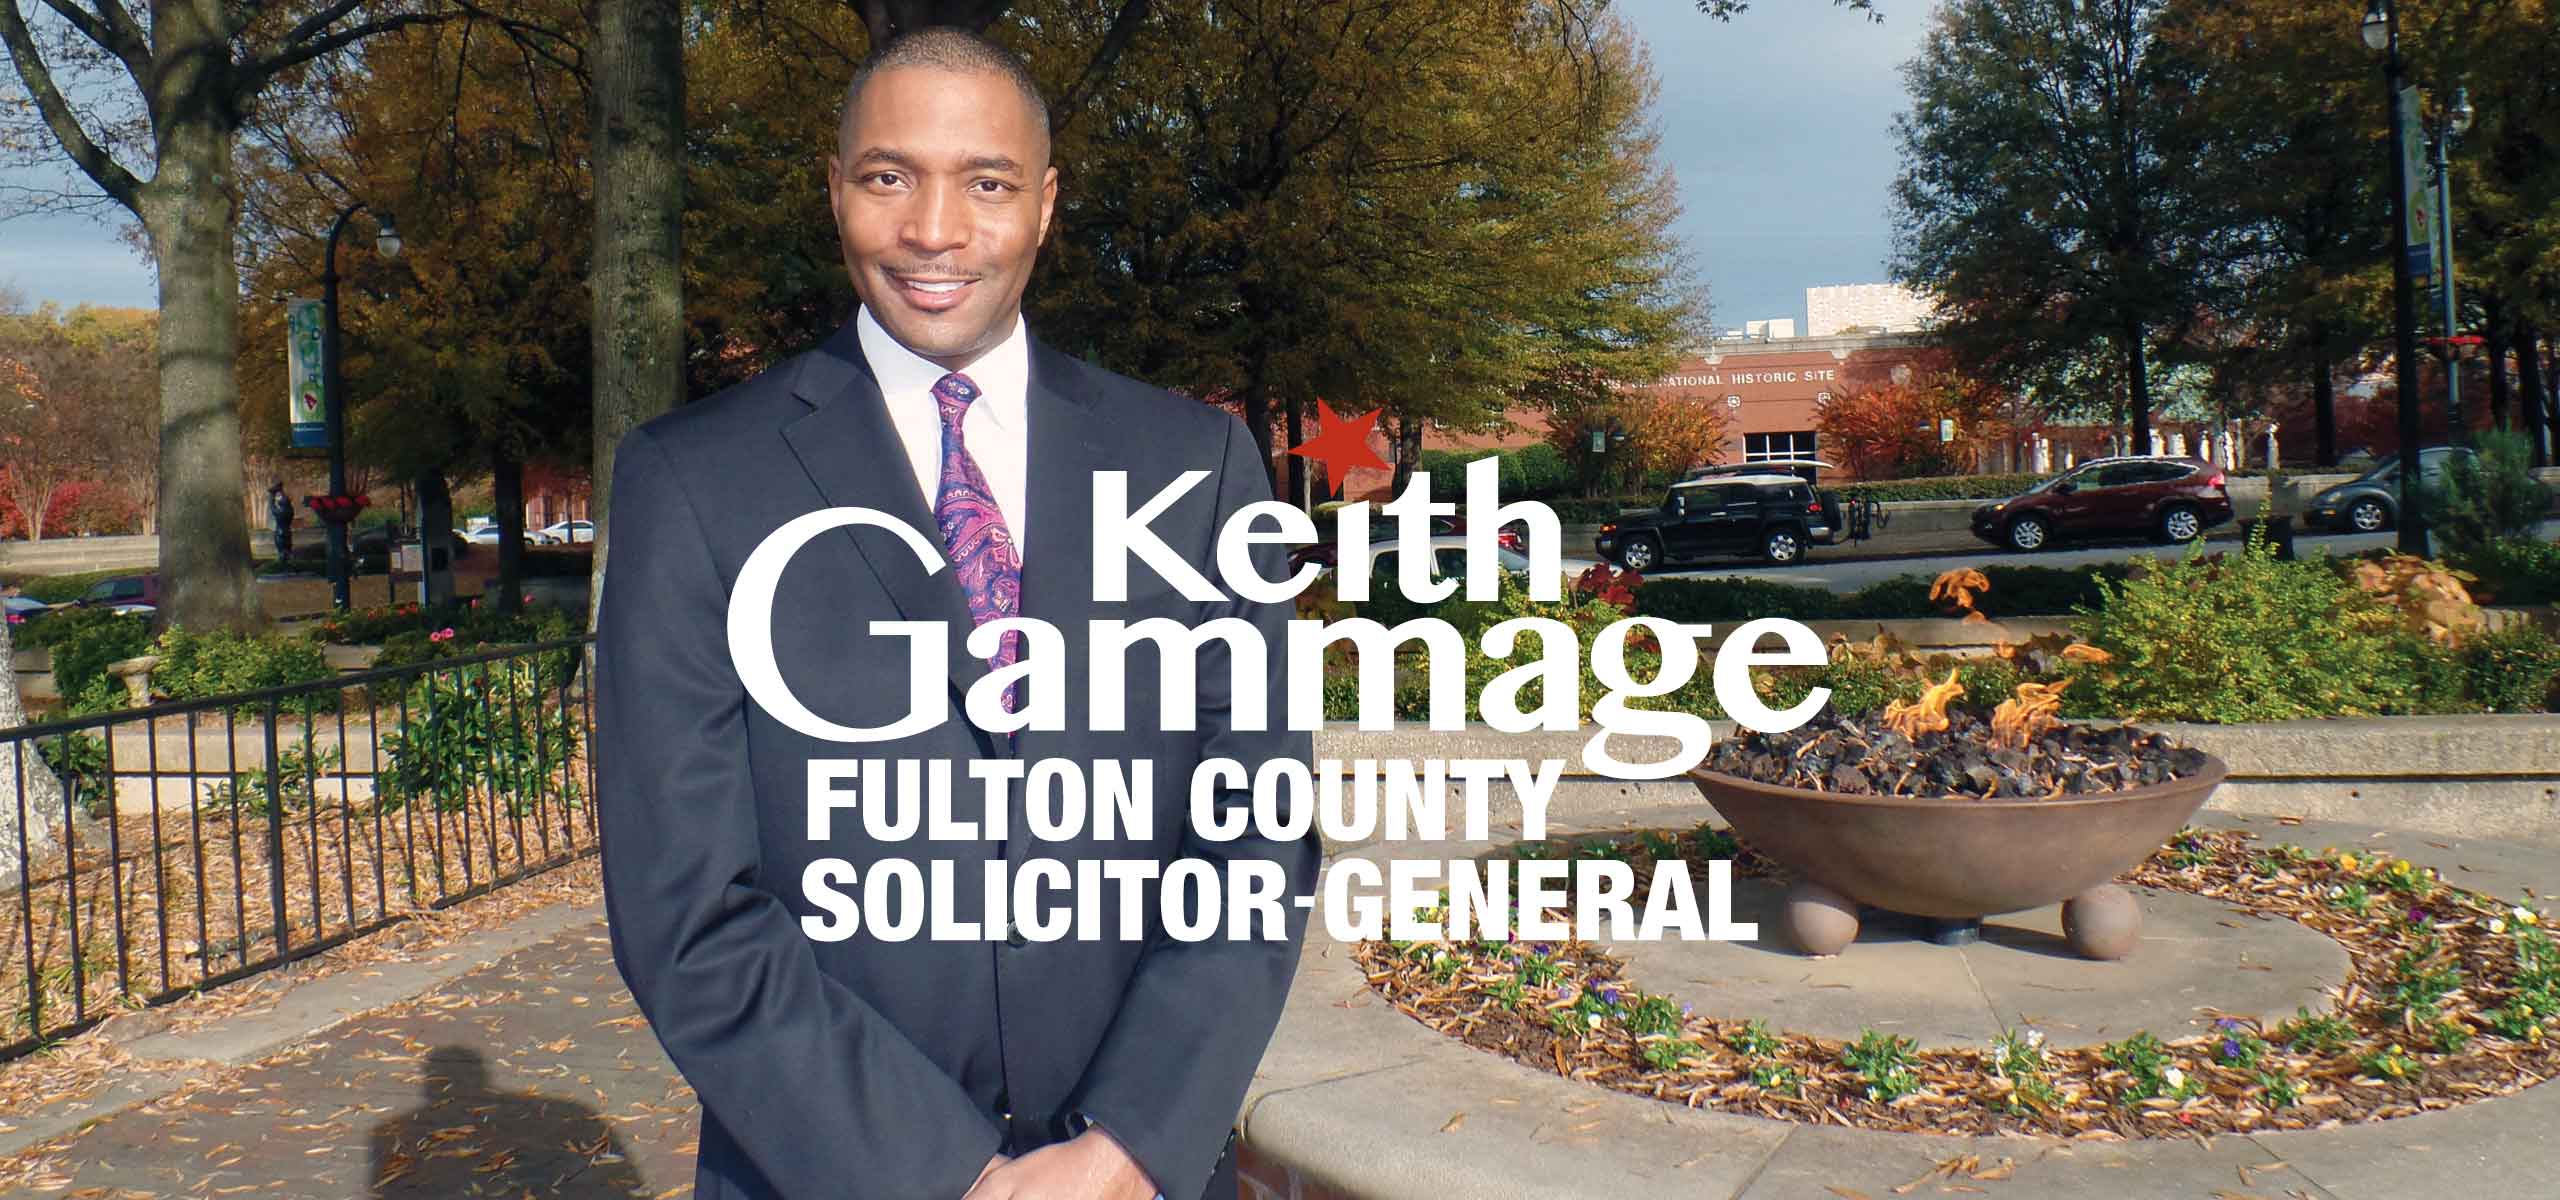 Elect Keith Gammage Fulton Solicitor-General